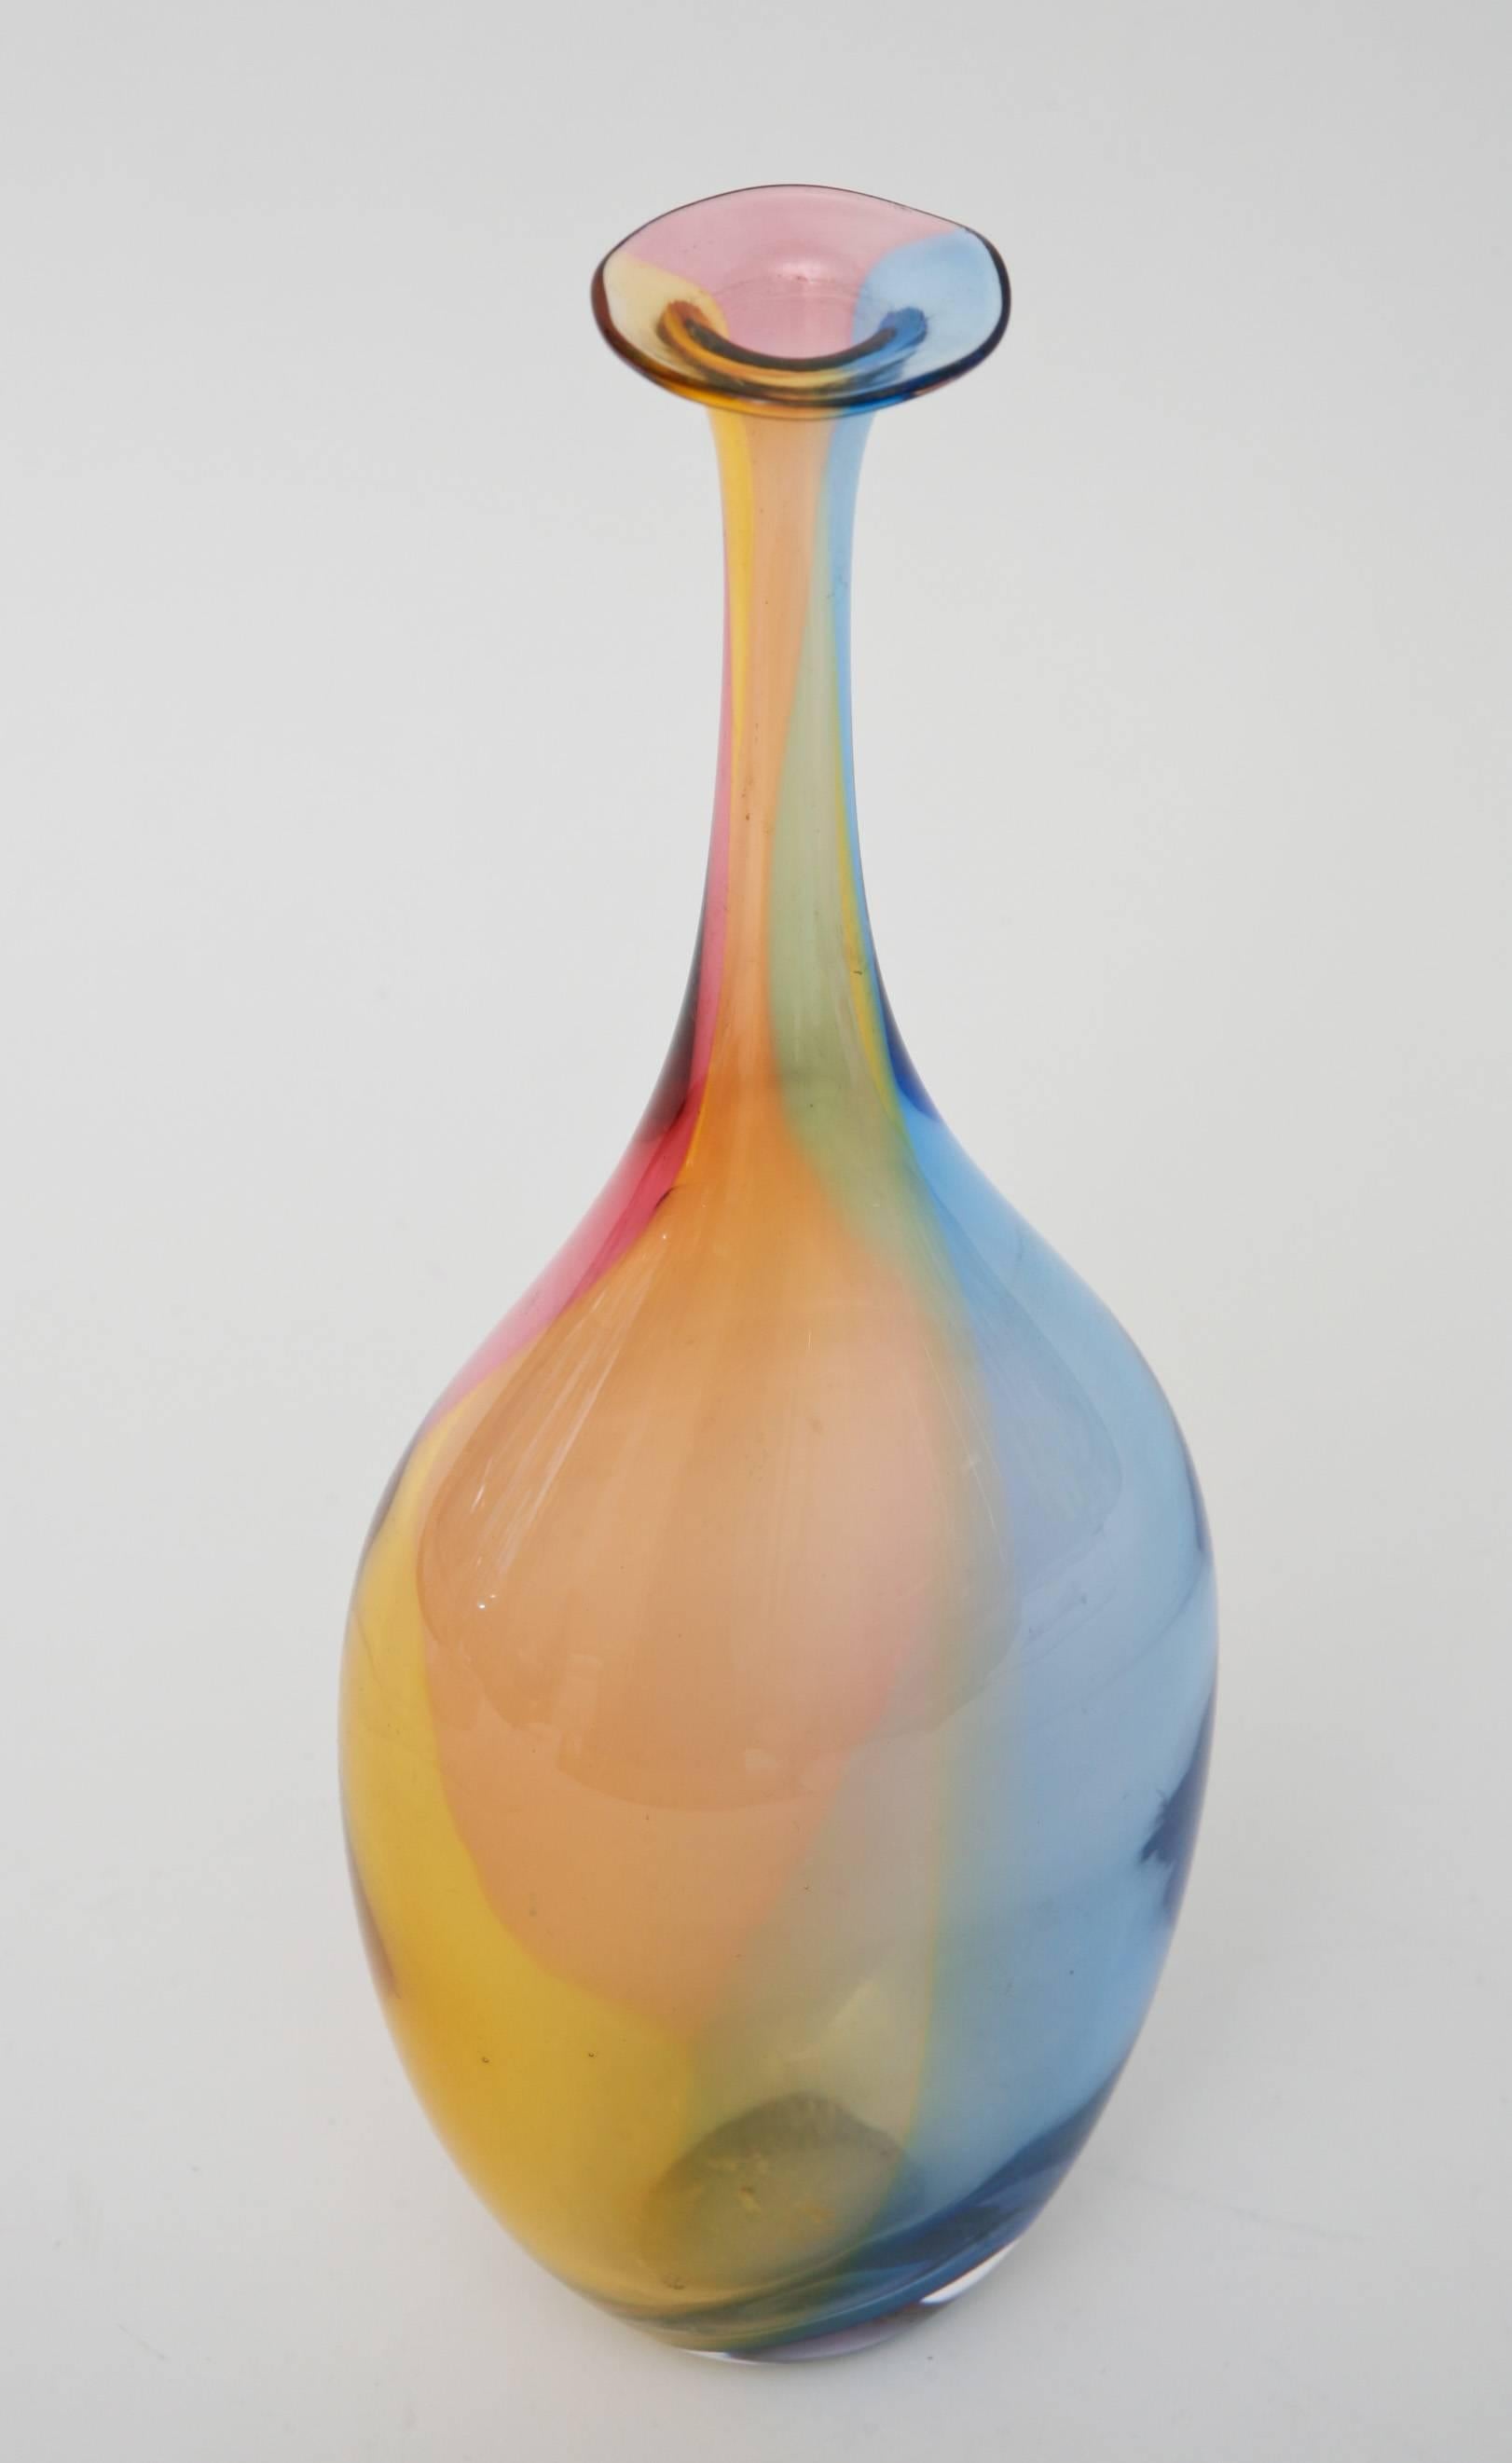 This beautiful glass object/ vessel is signed and numbered K.Engman 488-38
Kosta Boda.It is delicate in weight and delicate in beautiful shape and color.
it has an ethereal look and feel almost like a wisp of gorgeous subdued colors combined in